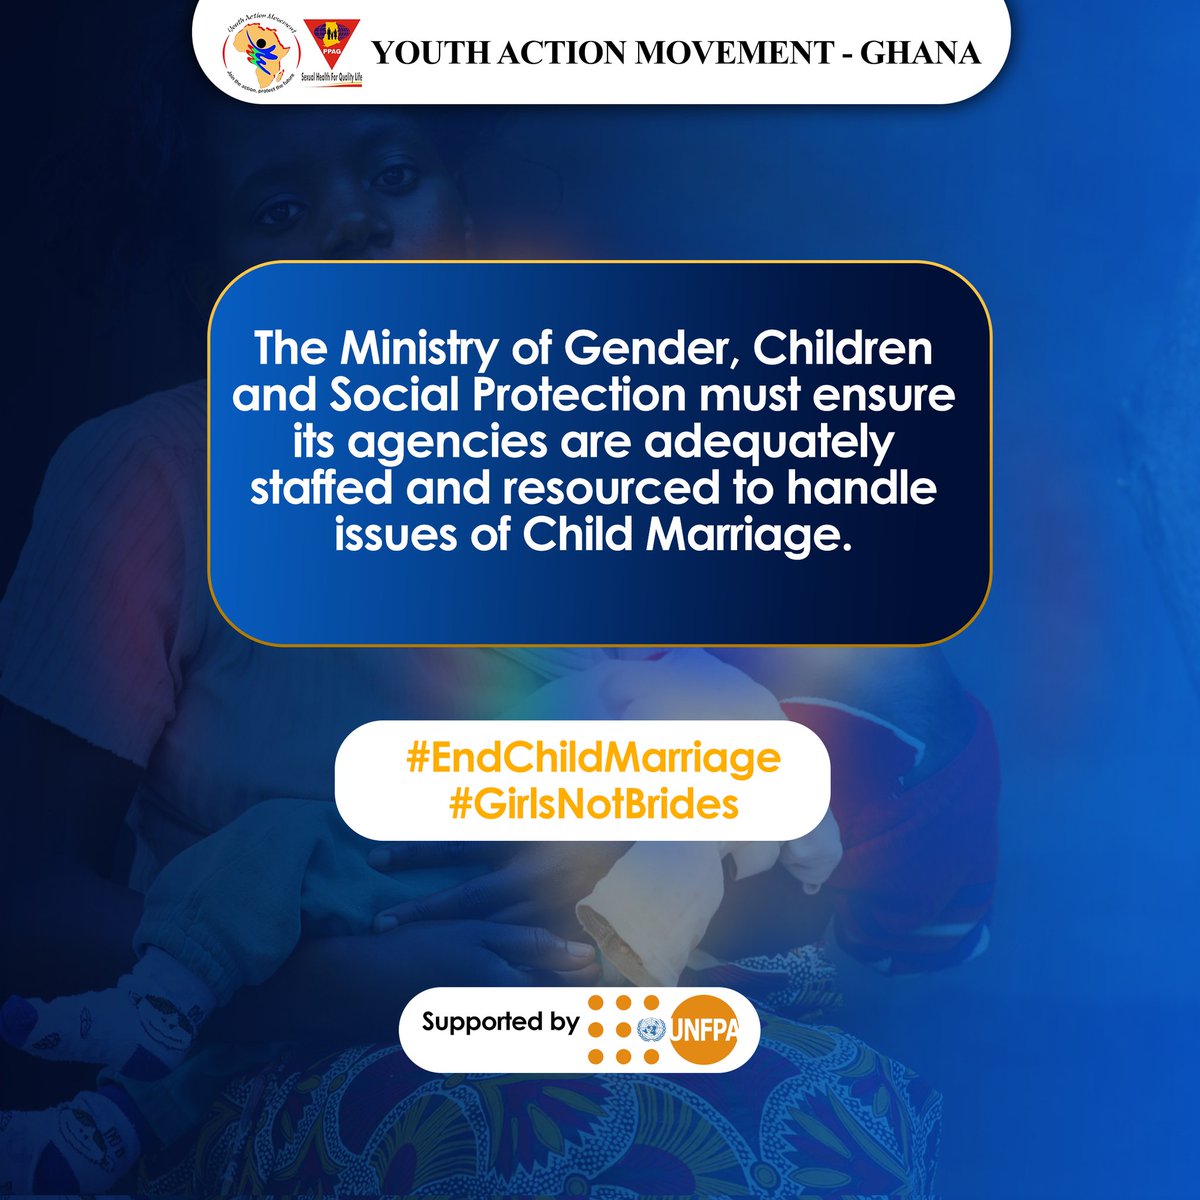 We are committed to envisioning a society free from child marriage. All stakeholders are involved including you. #EndChildMarriage #GirlsNotBrides YAMGhana-Join the Action, Protect the Future ‼️